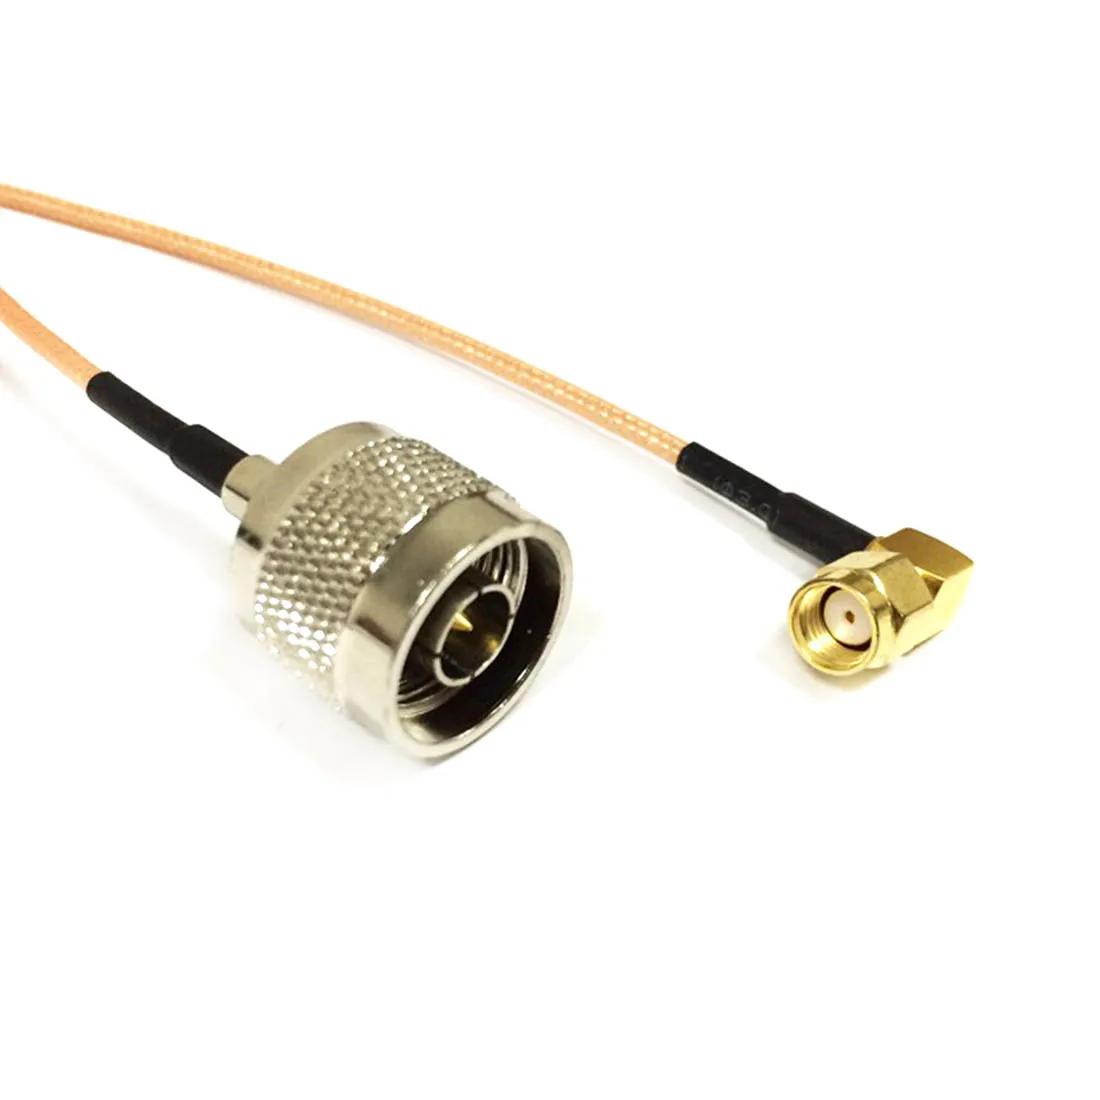 

Modem Coaxial Cable RP-SMA Male Plug Right Angle to N Male Plug Connector RG316 Cable Pigtail 15cm 6" Adapter New